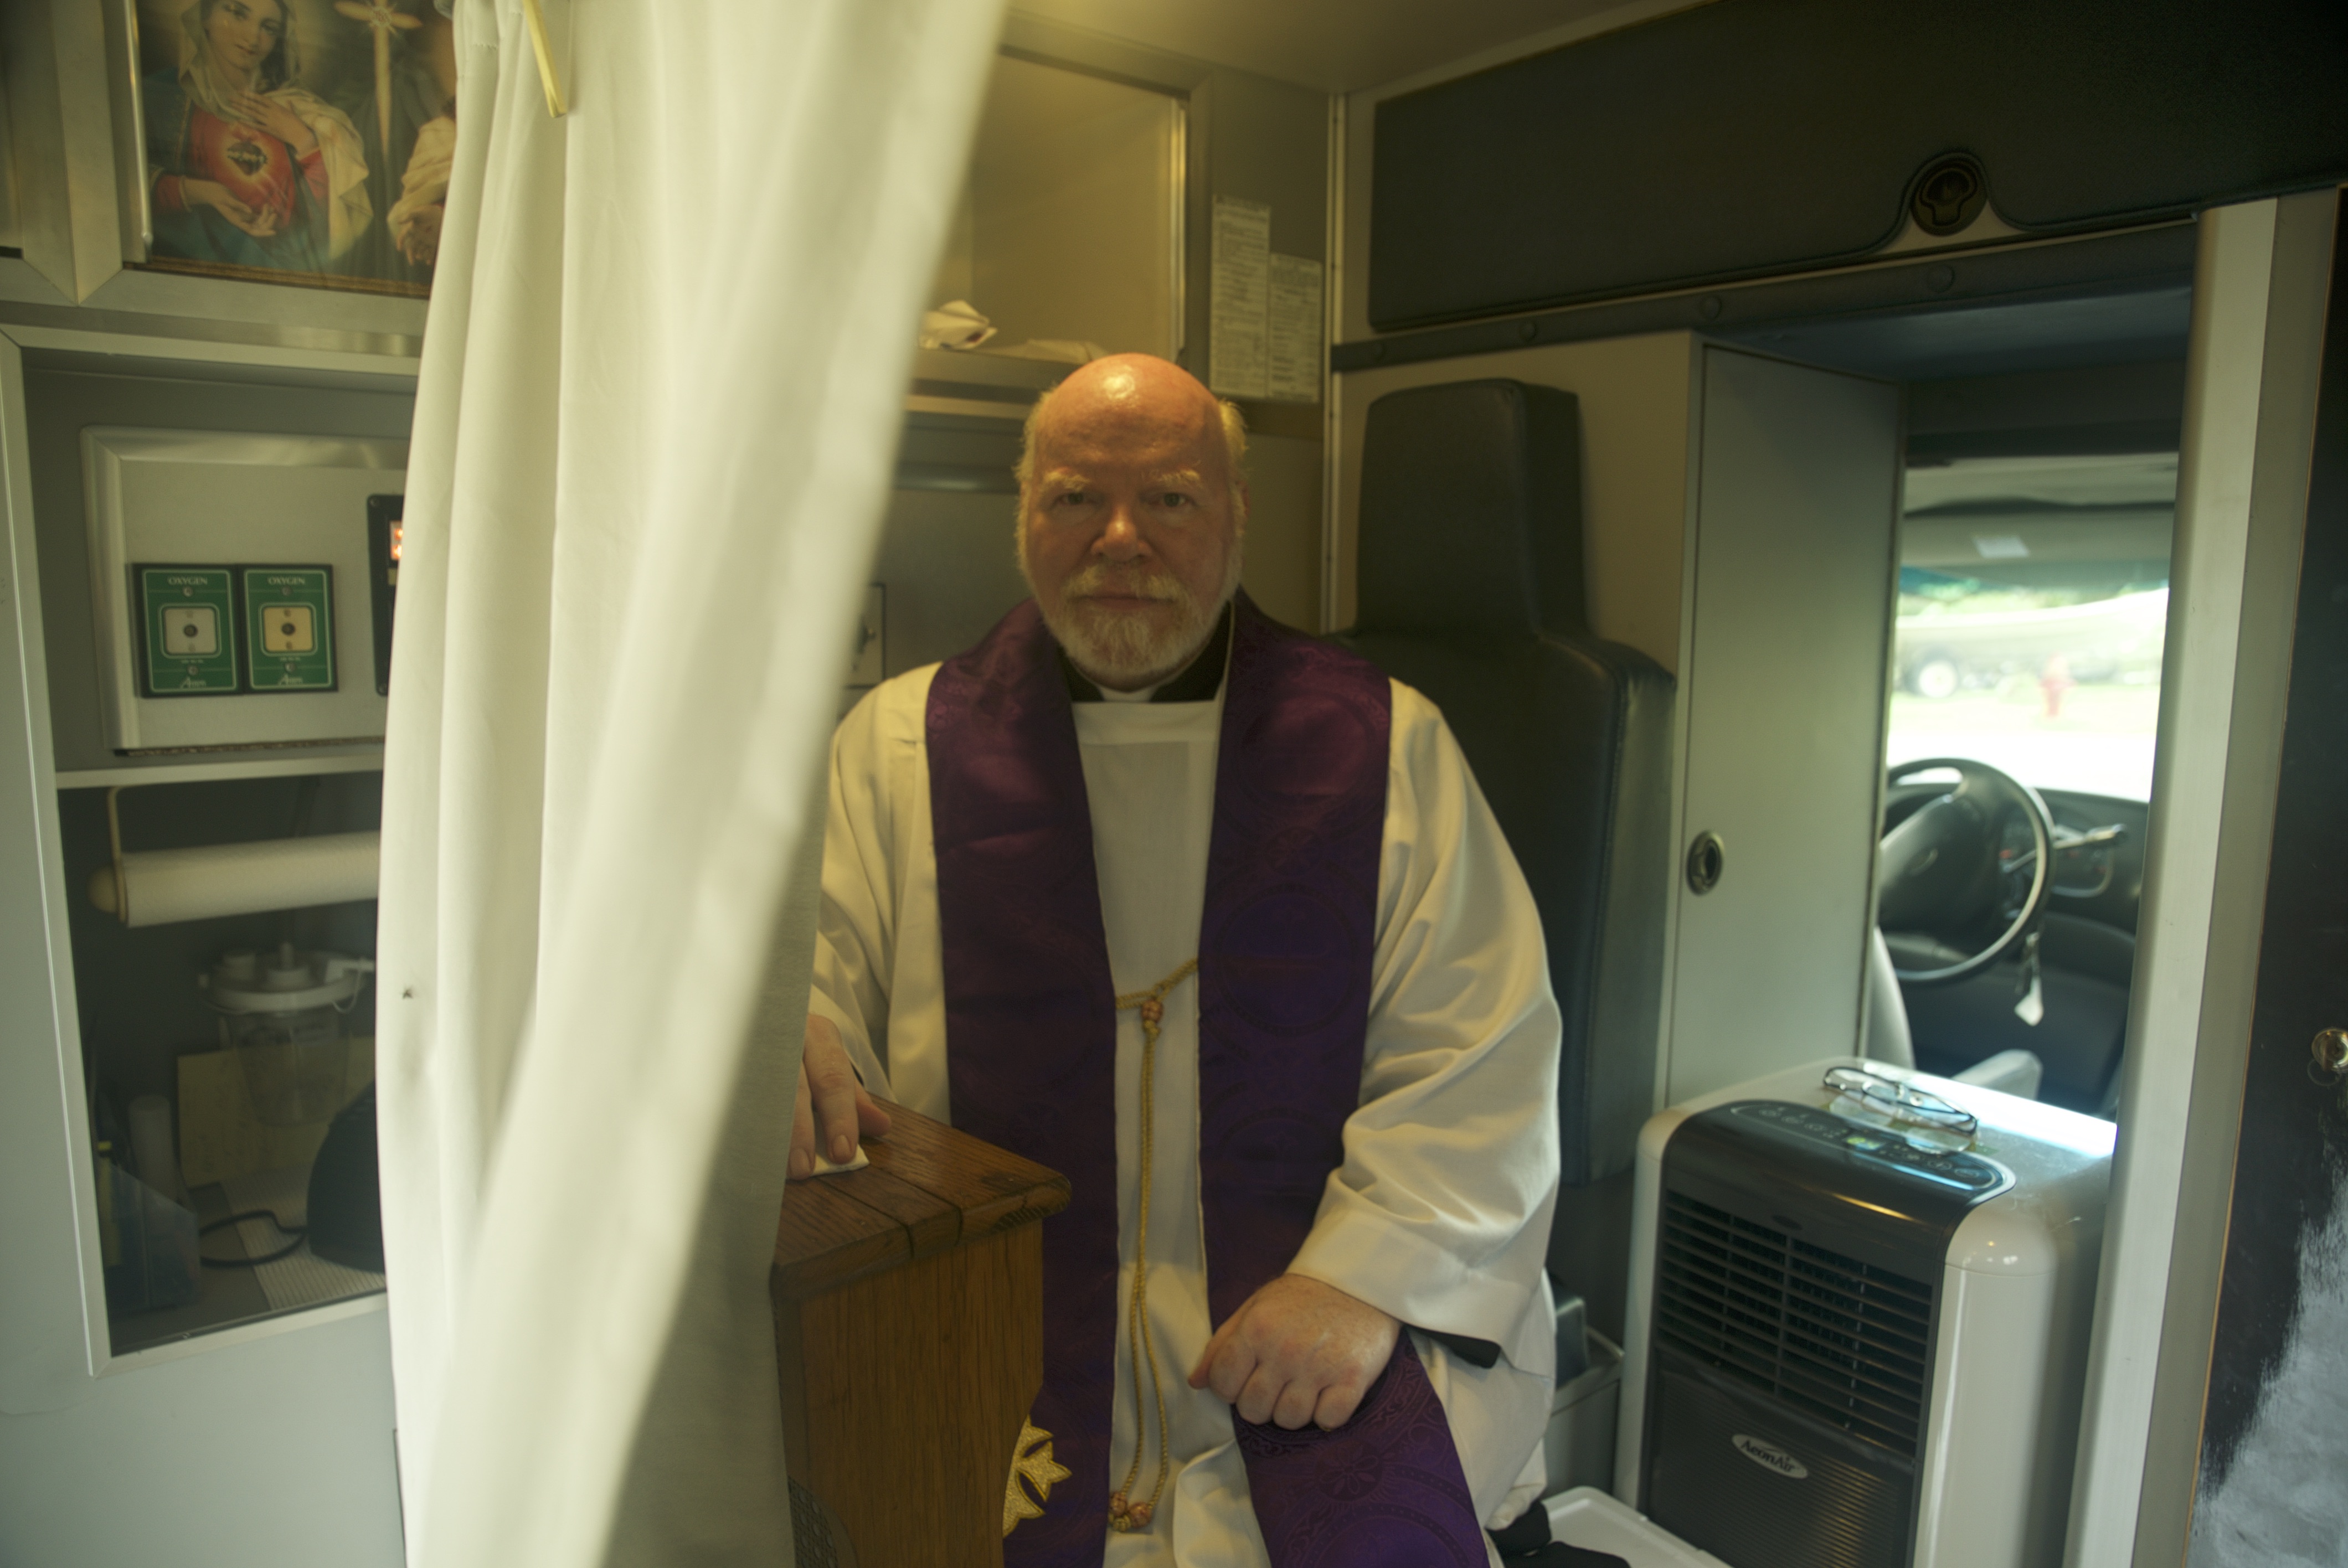 The Rev. William Seifert is one of the priests who hear confessions in the Spiritual Care Unit.